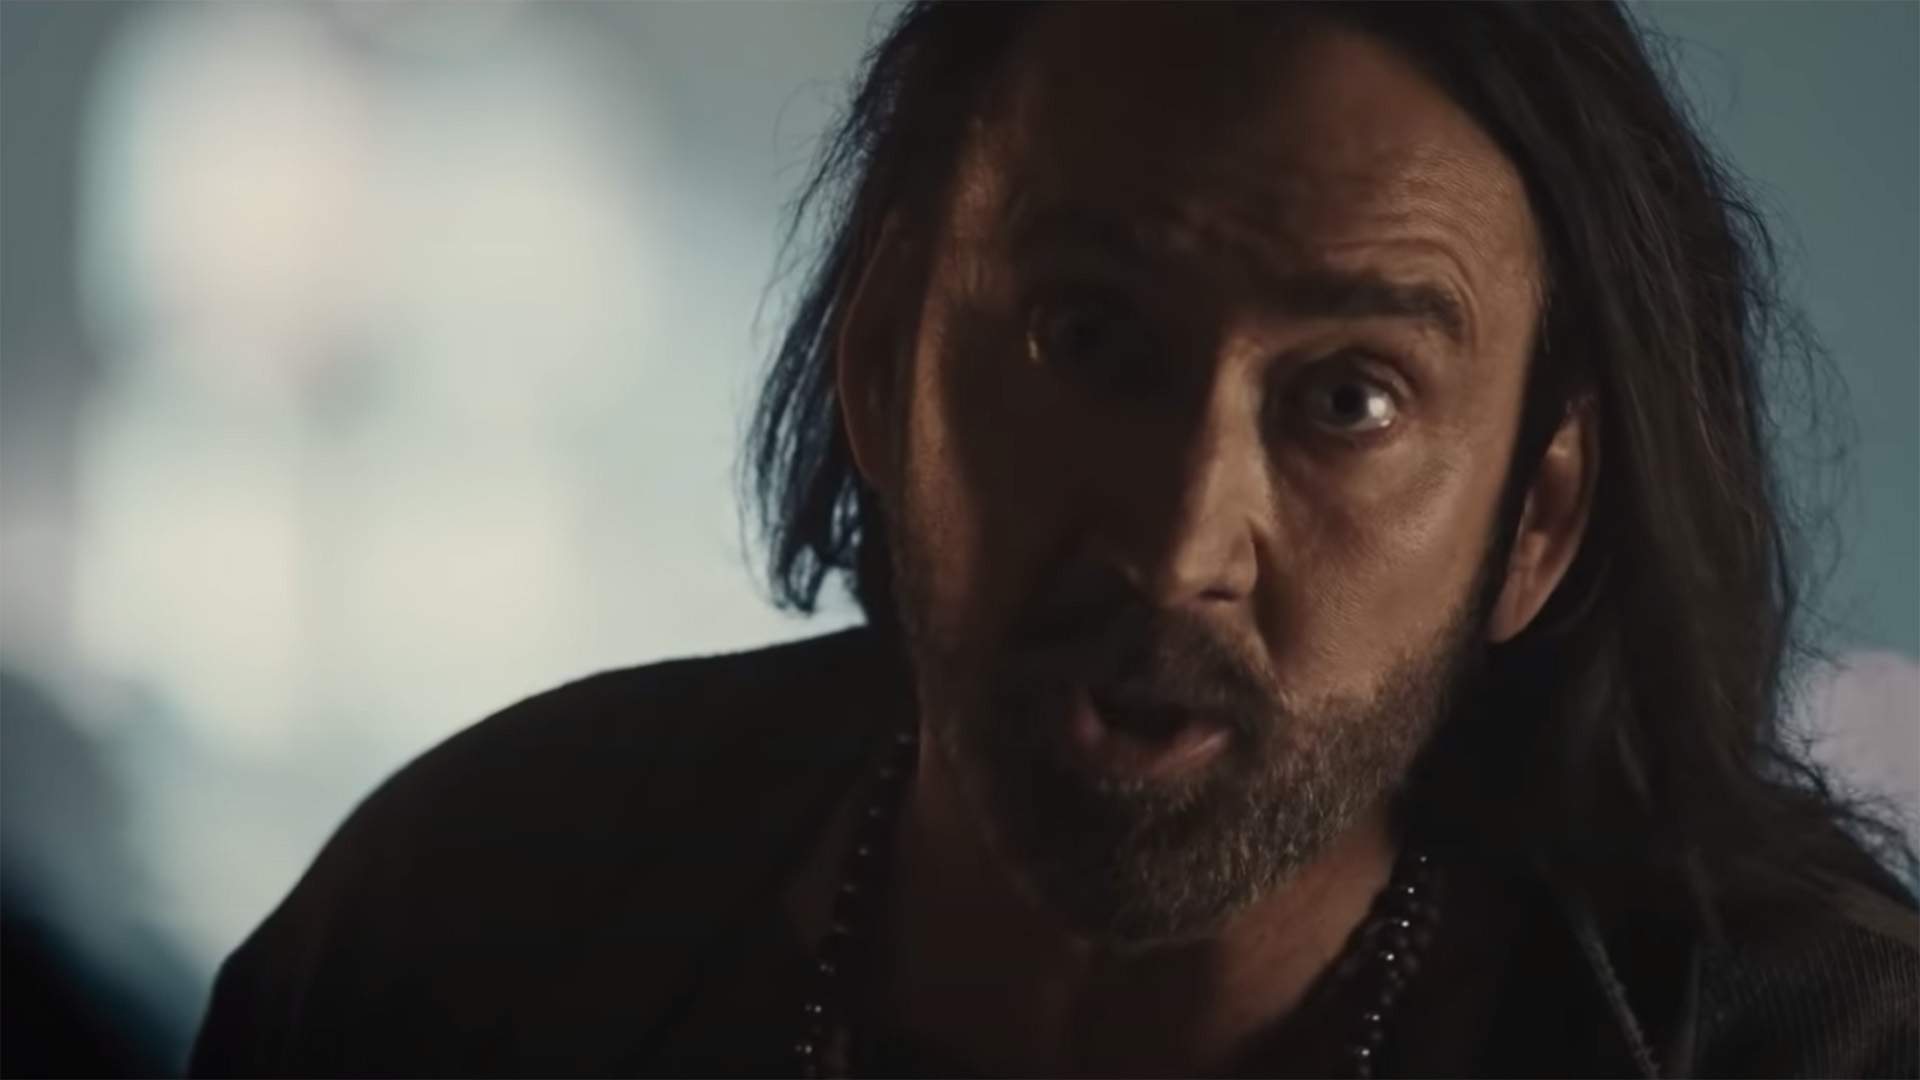 Nicolas Cage Fights Ninjas From Space in the Trailer for OTT New Action Movie 'Jiu Jitsu'